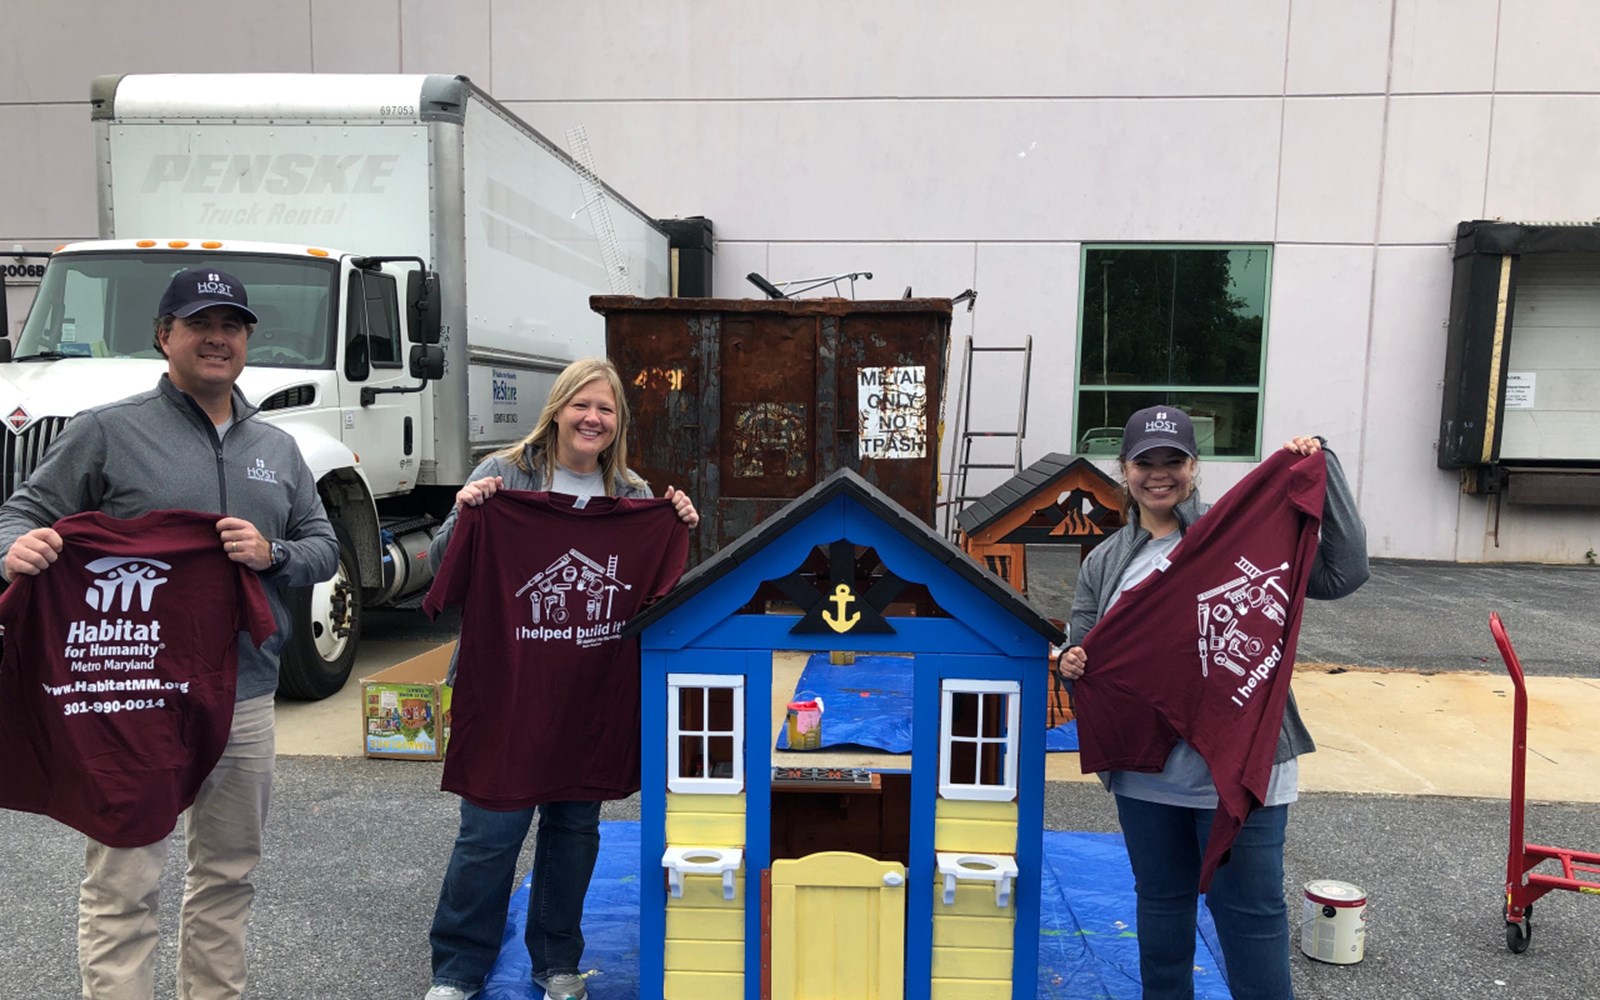 Volunteers construct and paint children’s playhouses that are donated to local Habitat families